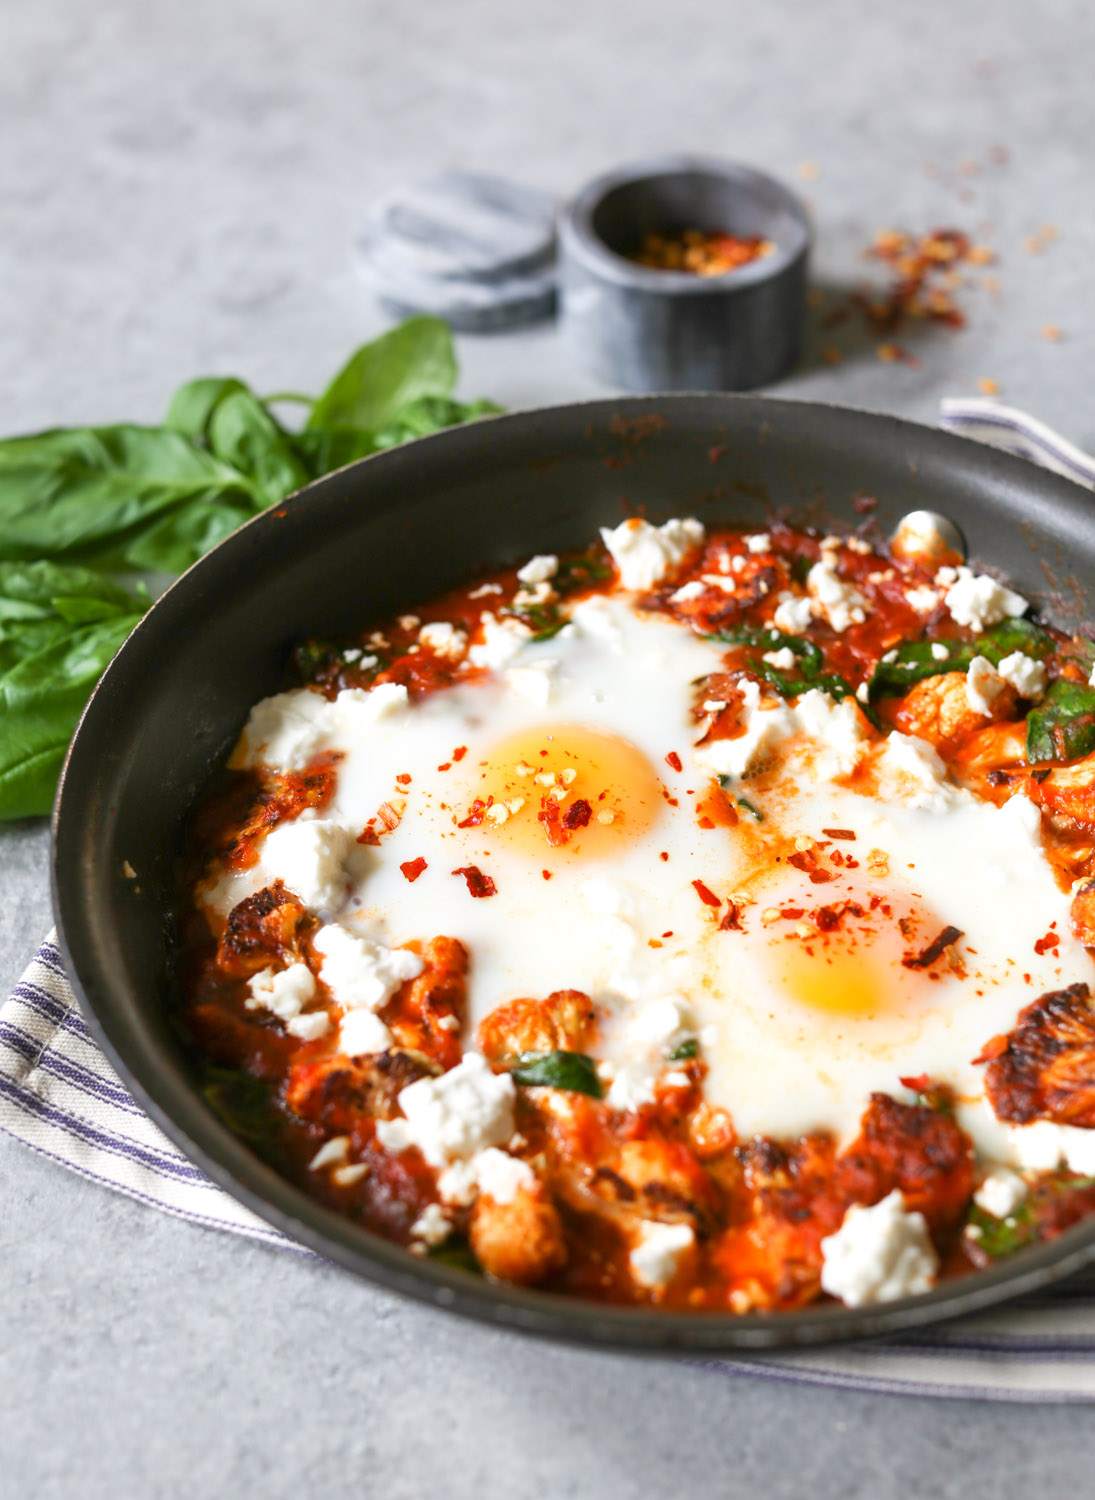 5-ingredient Skillet Eggs with Spinach and Roasted Cauliflower